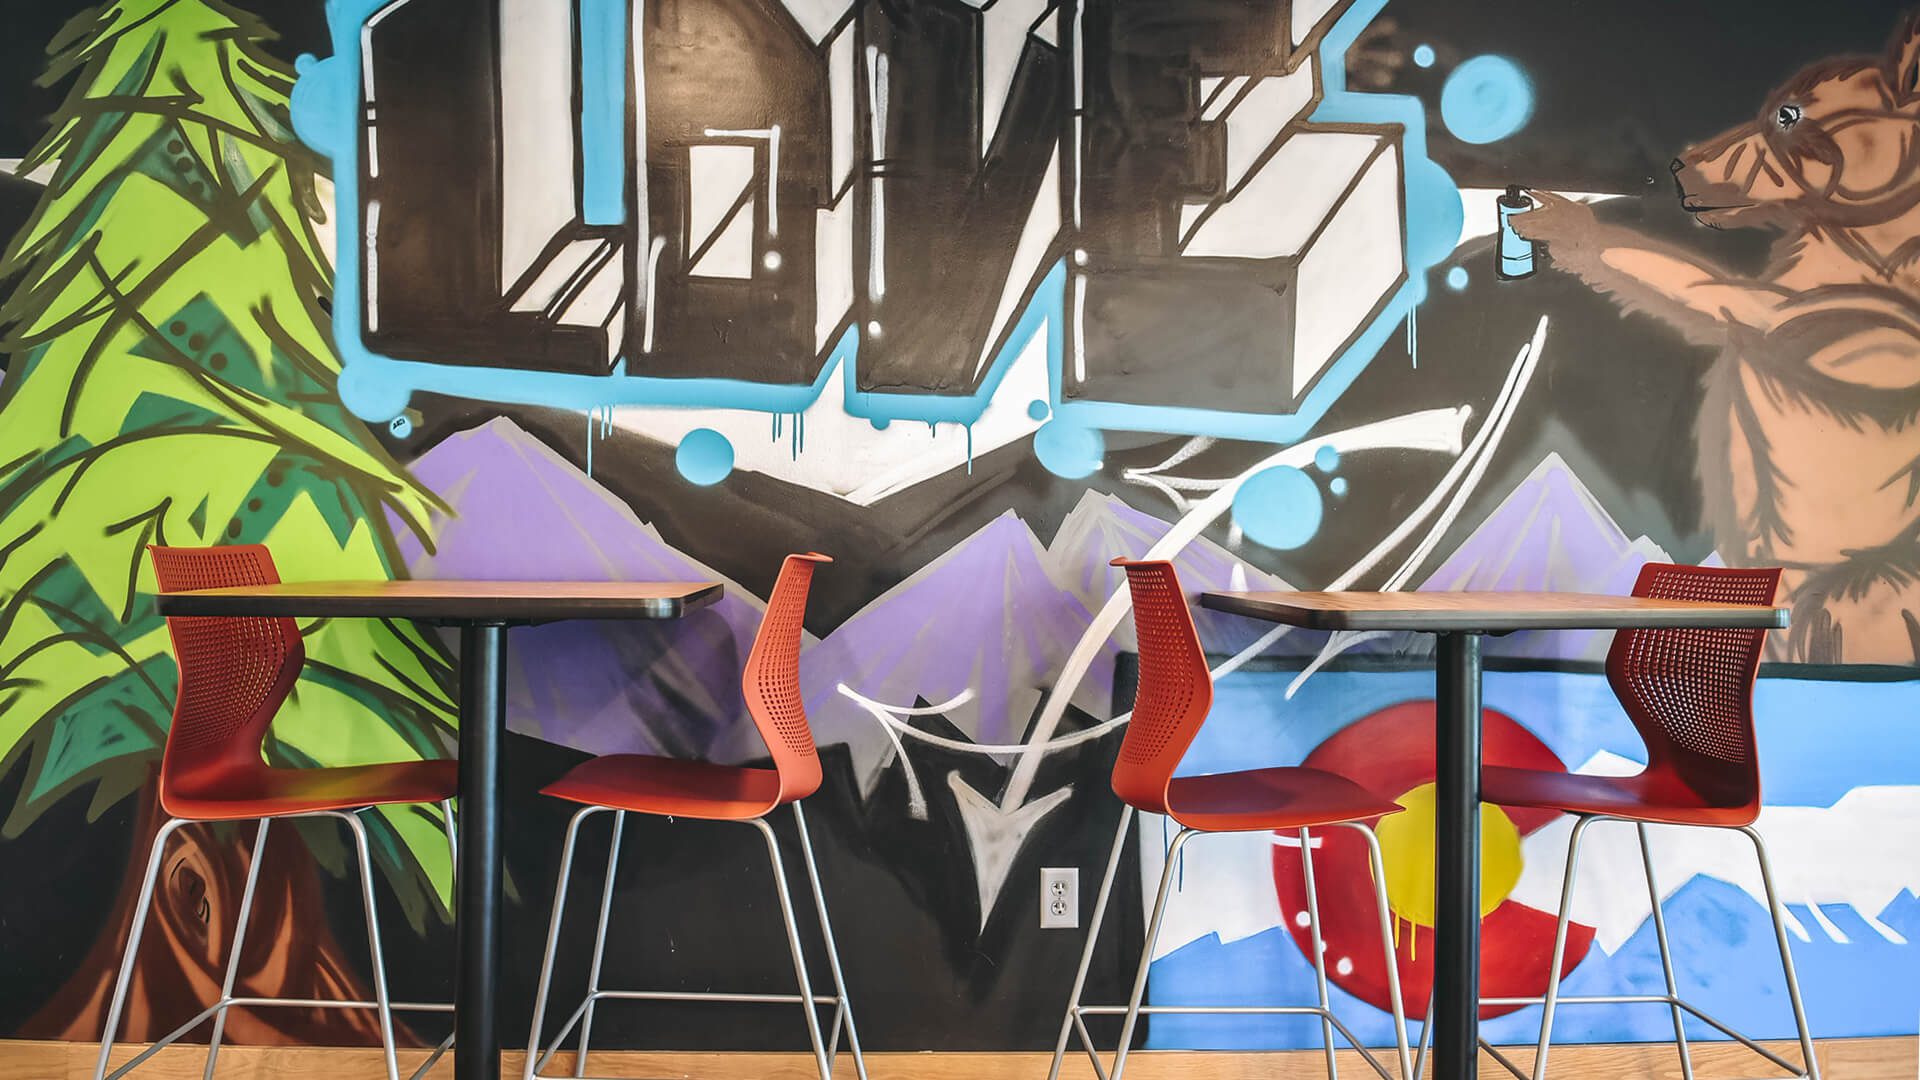 Table and chairs in front of graffiti artwork mural